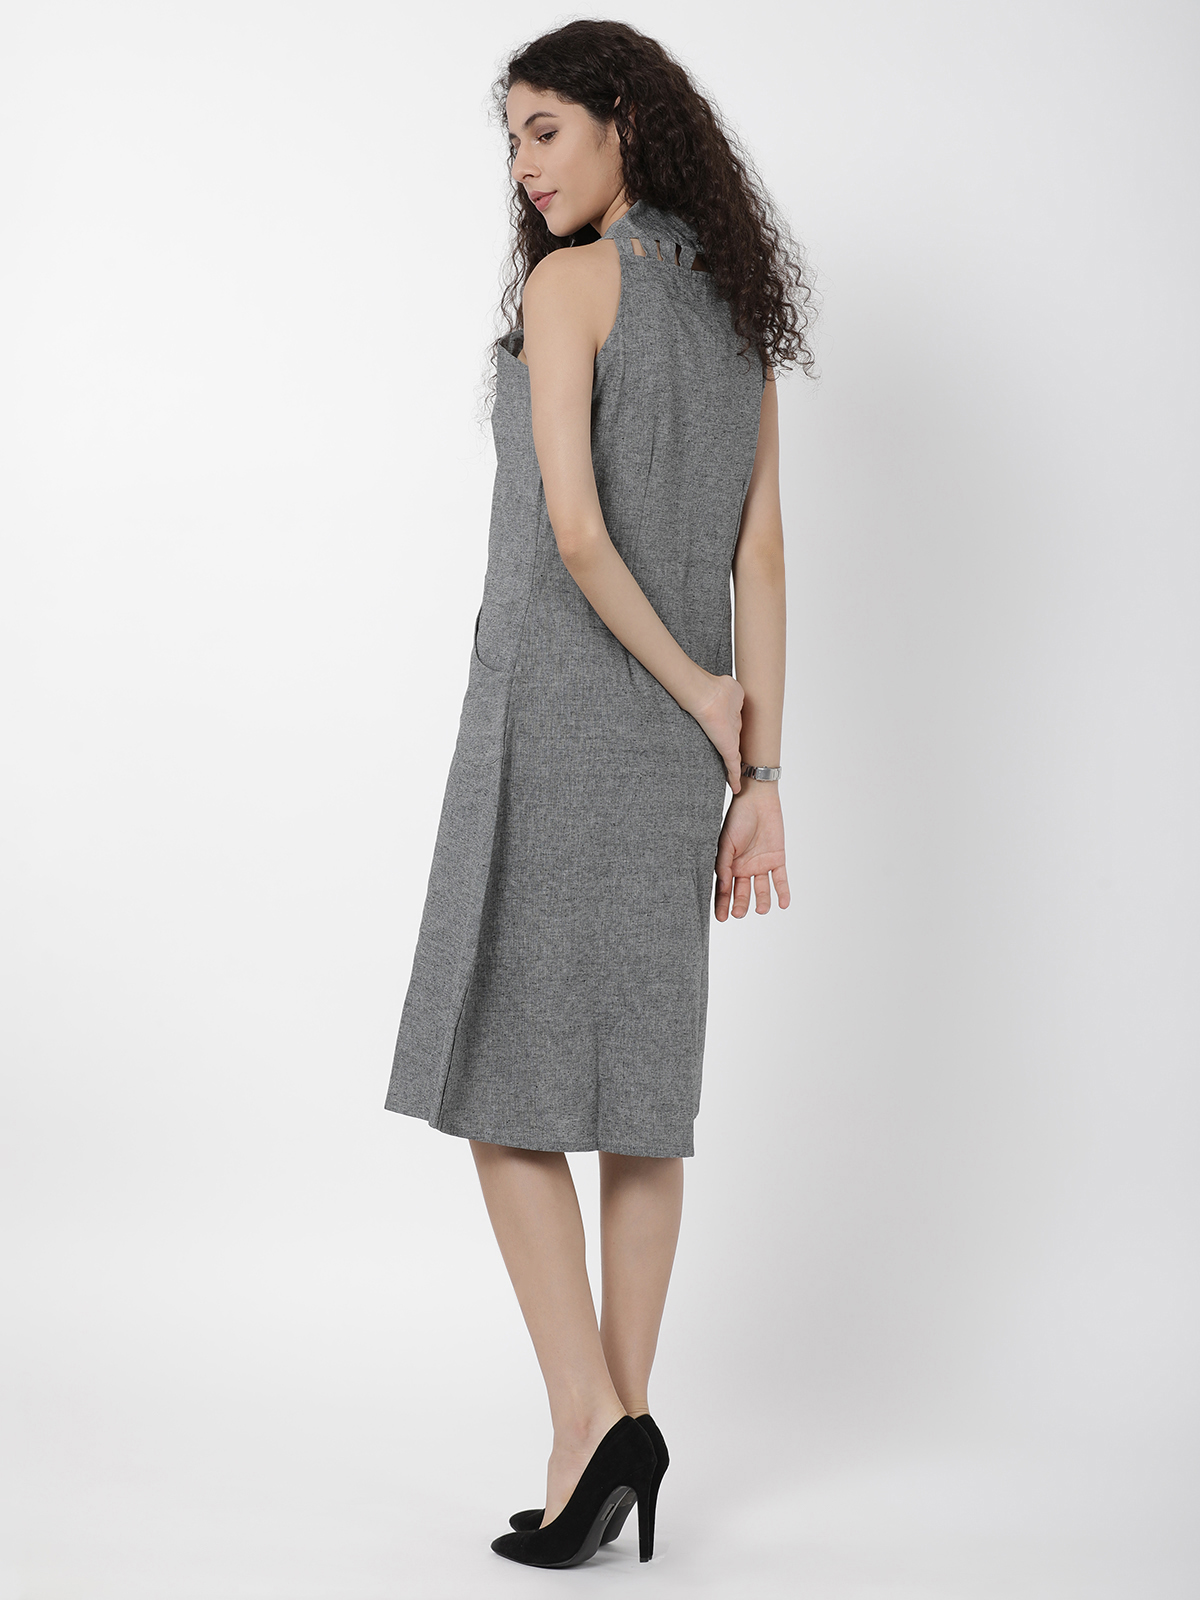 Solid Grey High Neck A Line One Piece Dress